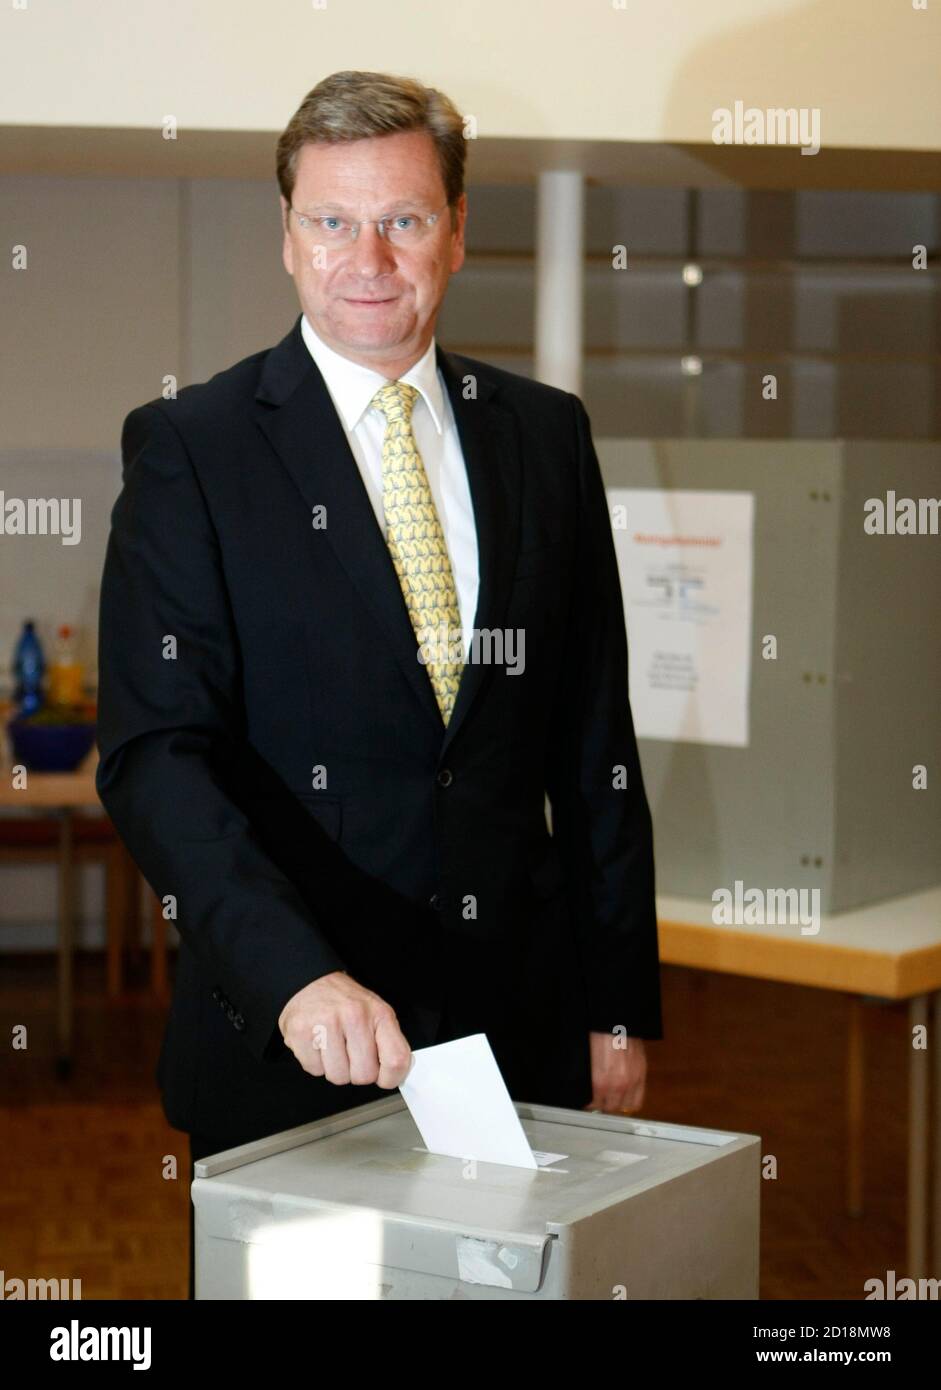 Guido Westerwelle, leader of the pro-business Free Democratic Party (FDP) casts his ballot in the general election at a polling station in Bonn September 27, 2009. Germans voted in the general election (Bundestagwahl) on Sunday.  REUTERS/Ina Fassbender (GERMANY POLITICS ELECTIONS) Stock Photo